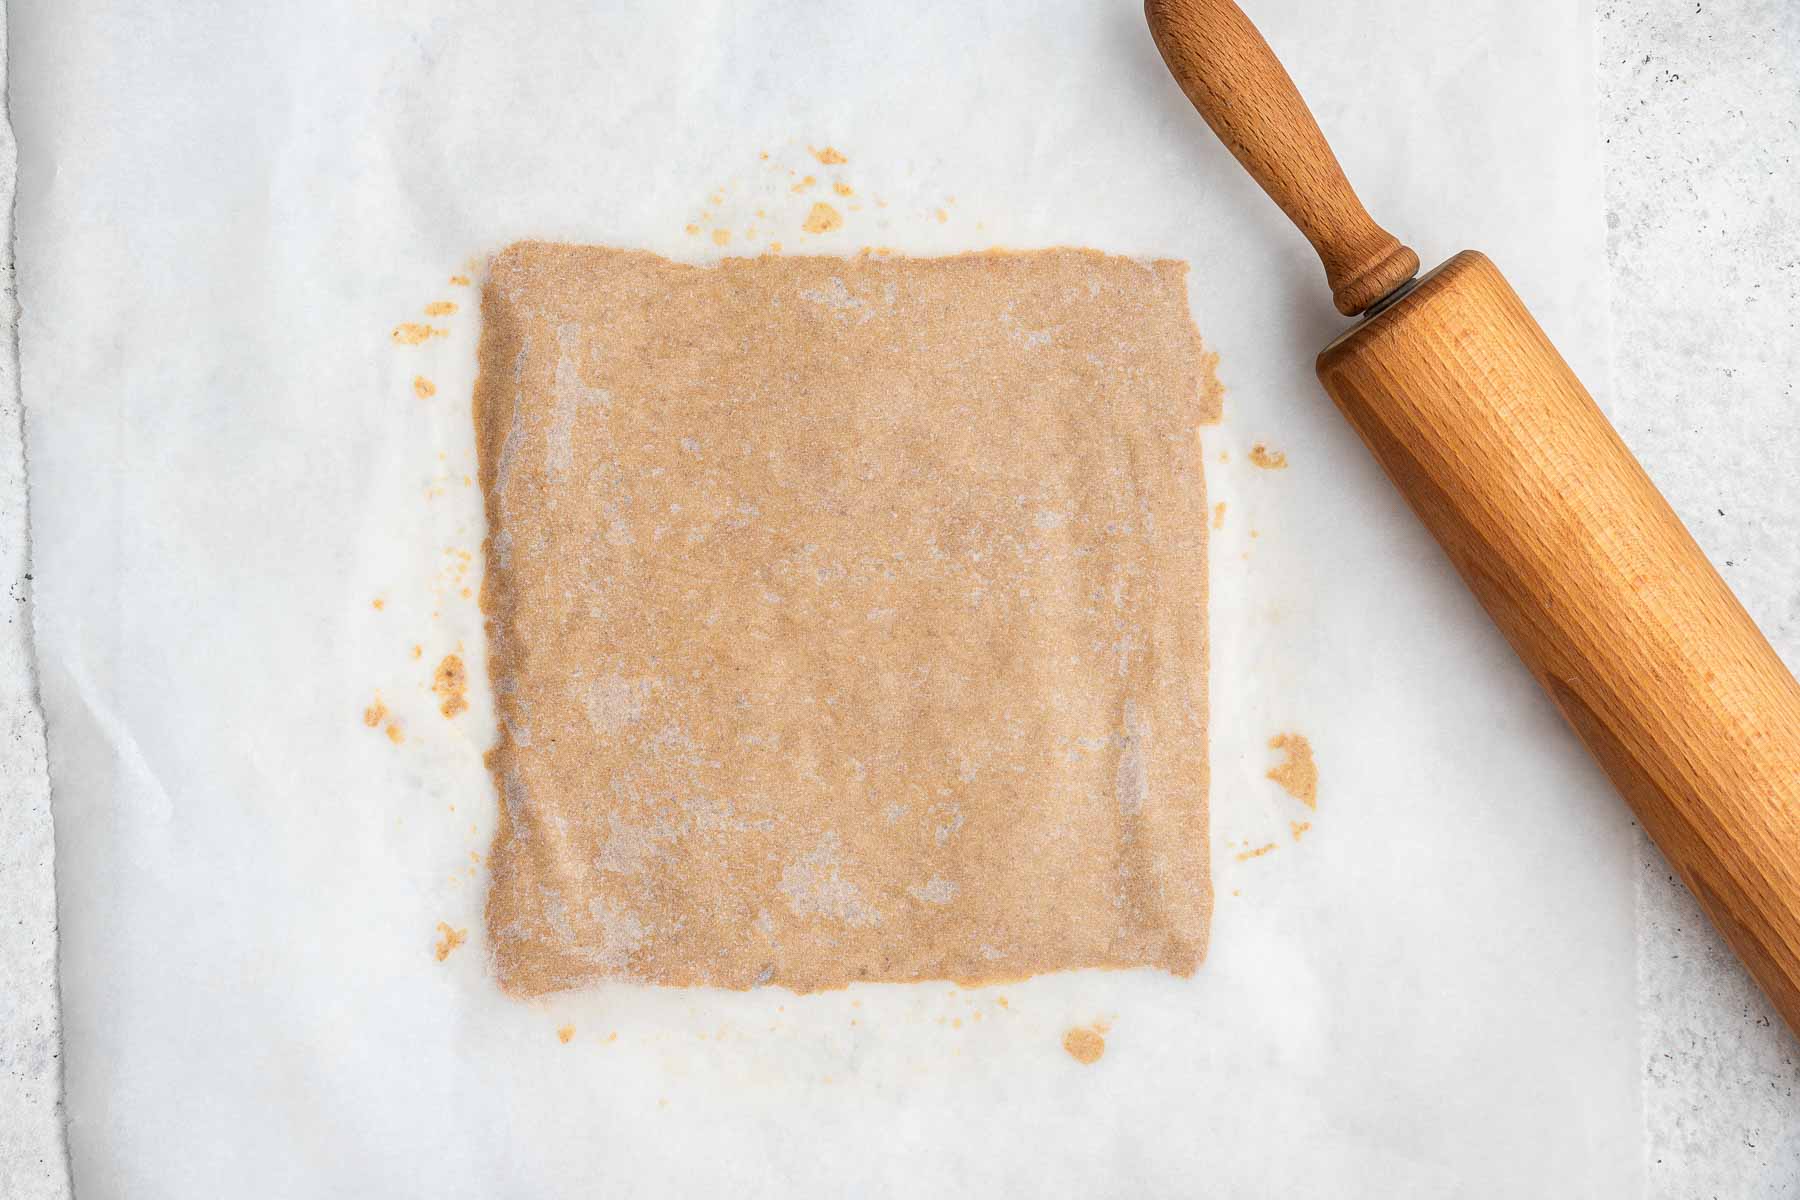 Dough rolled to a perfect square with rolling pin on the side.